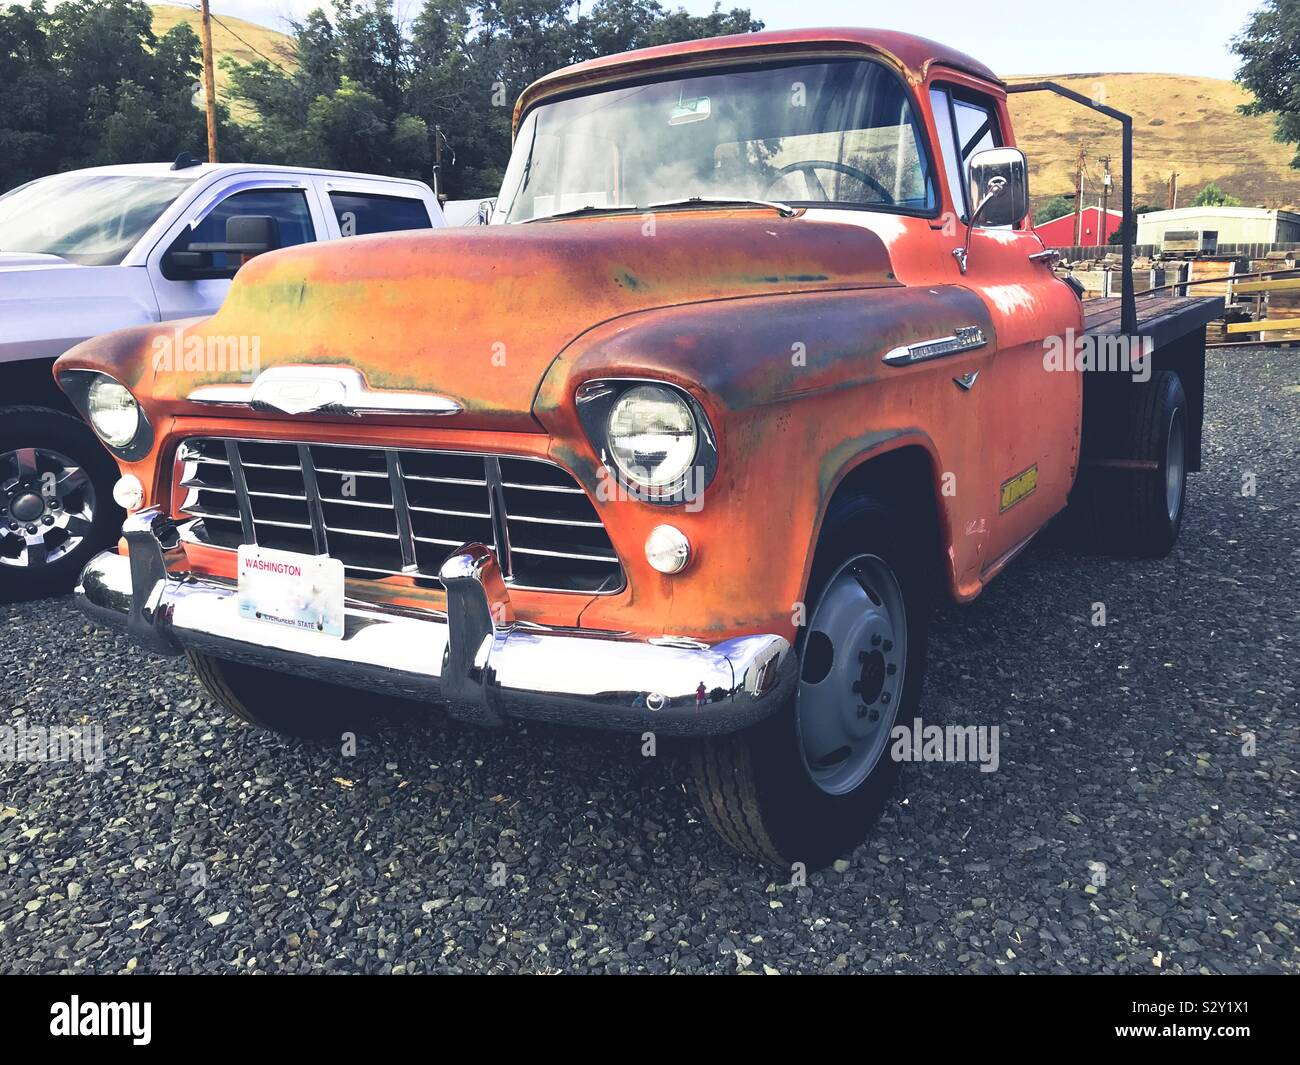 Heavy Chevy- vintage rusted Chevrolet work truck in 3/4 view Stock Photo